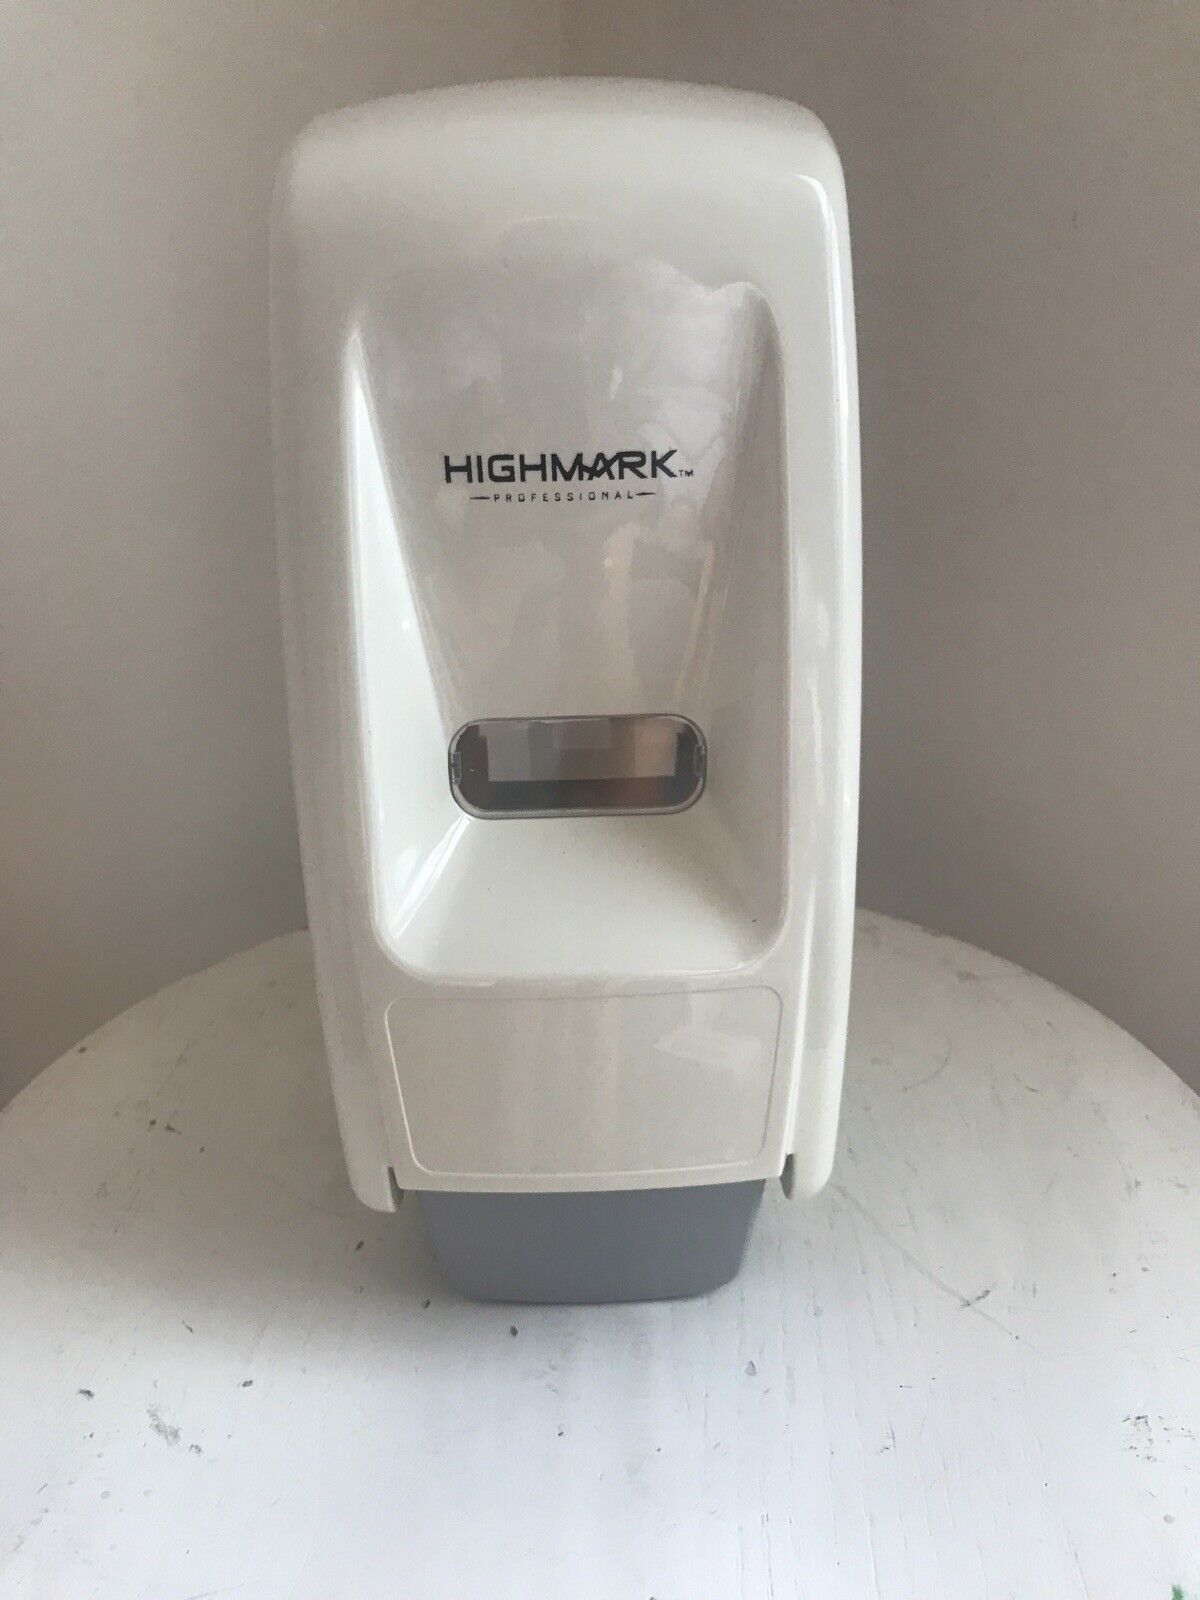 Fashionable High Mark professional soap hand new dispenser Inventory cleanup selling sale brand